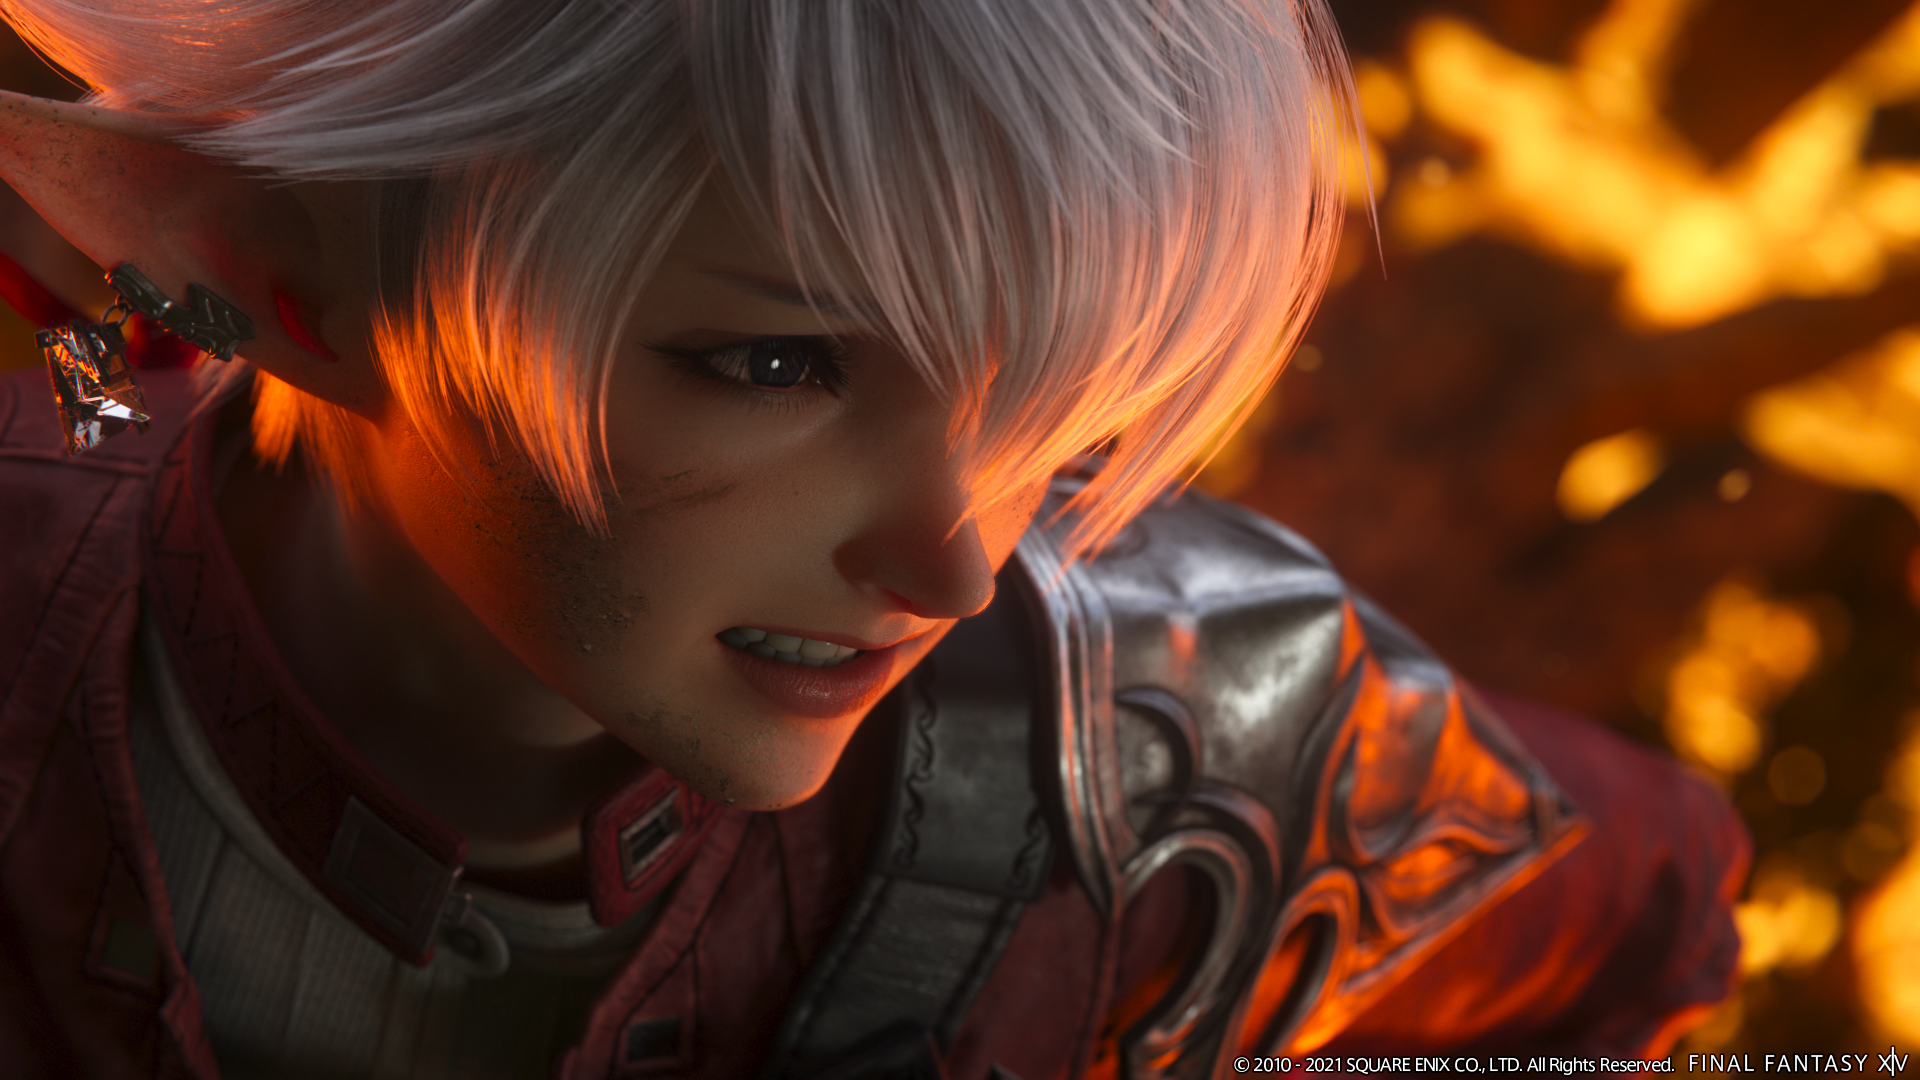 Image for Final Fantasy 14 becomes most profitable entry in the series thanks to exceeding 24 million players